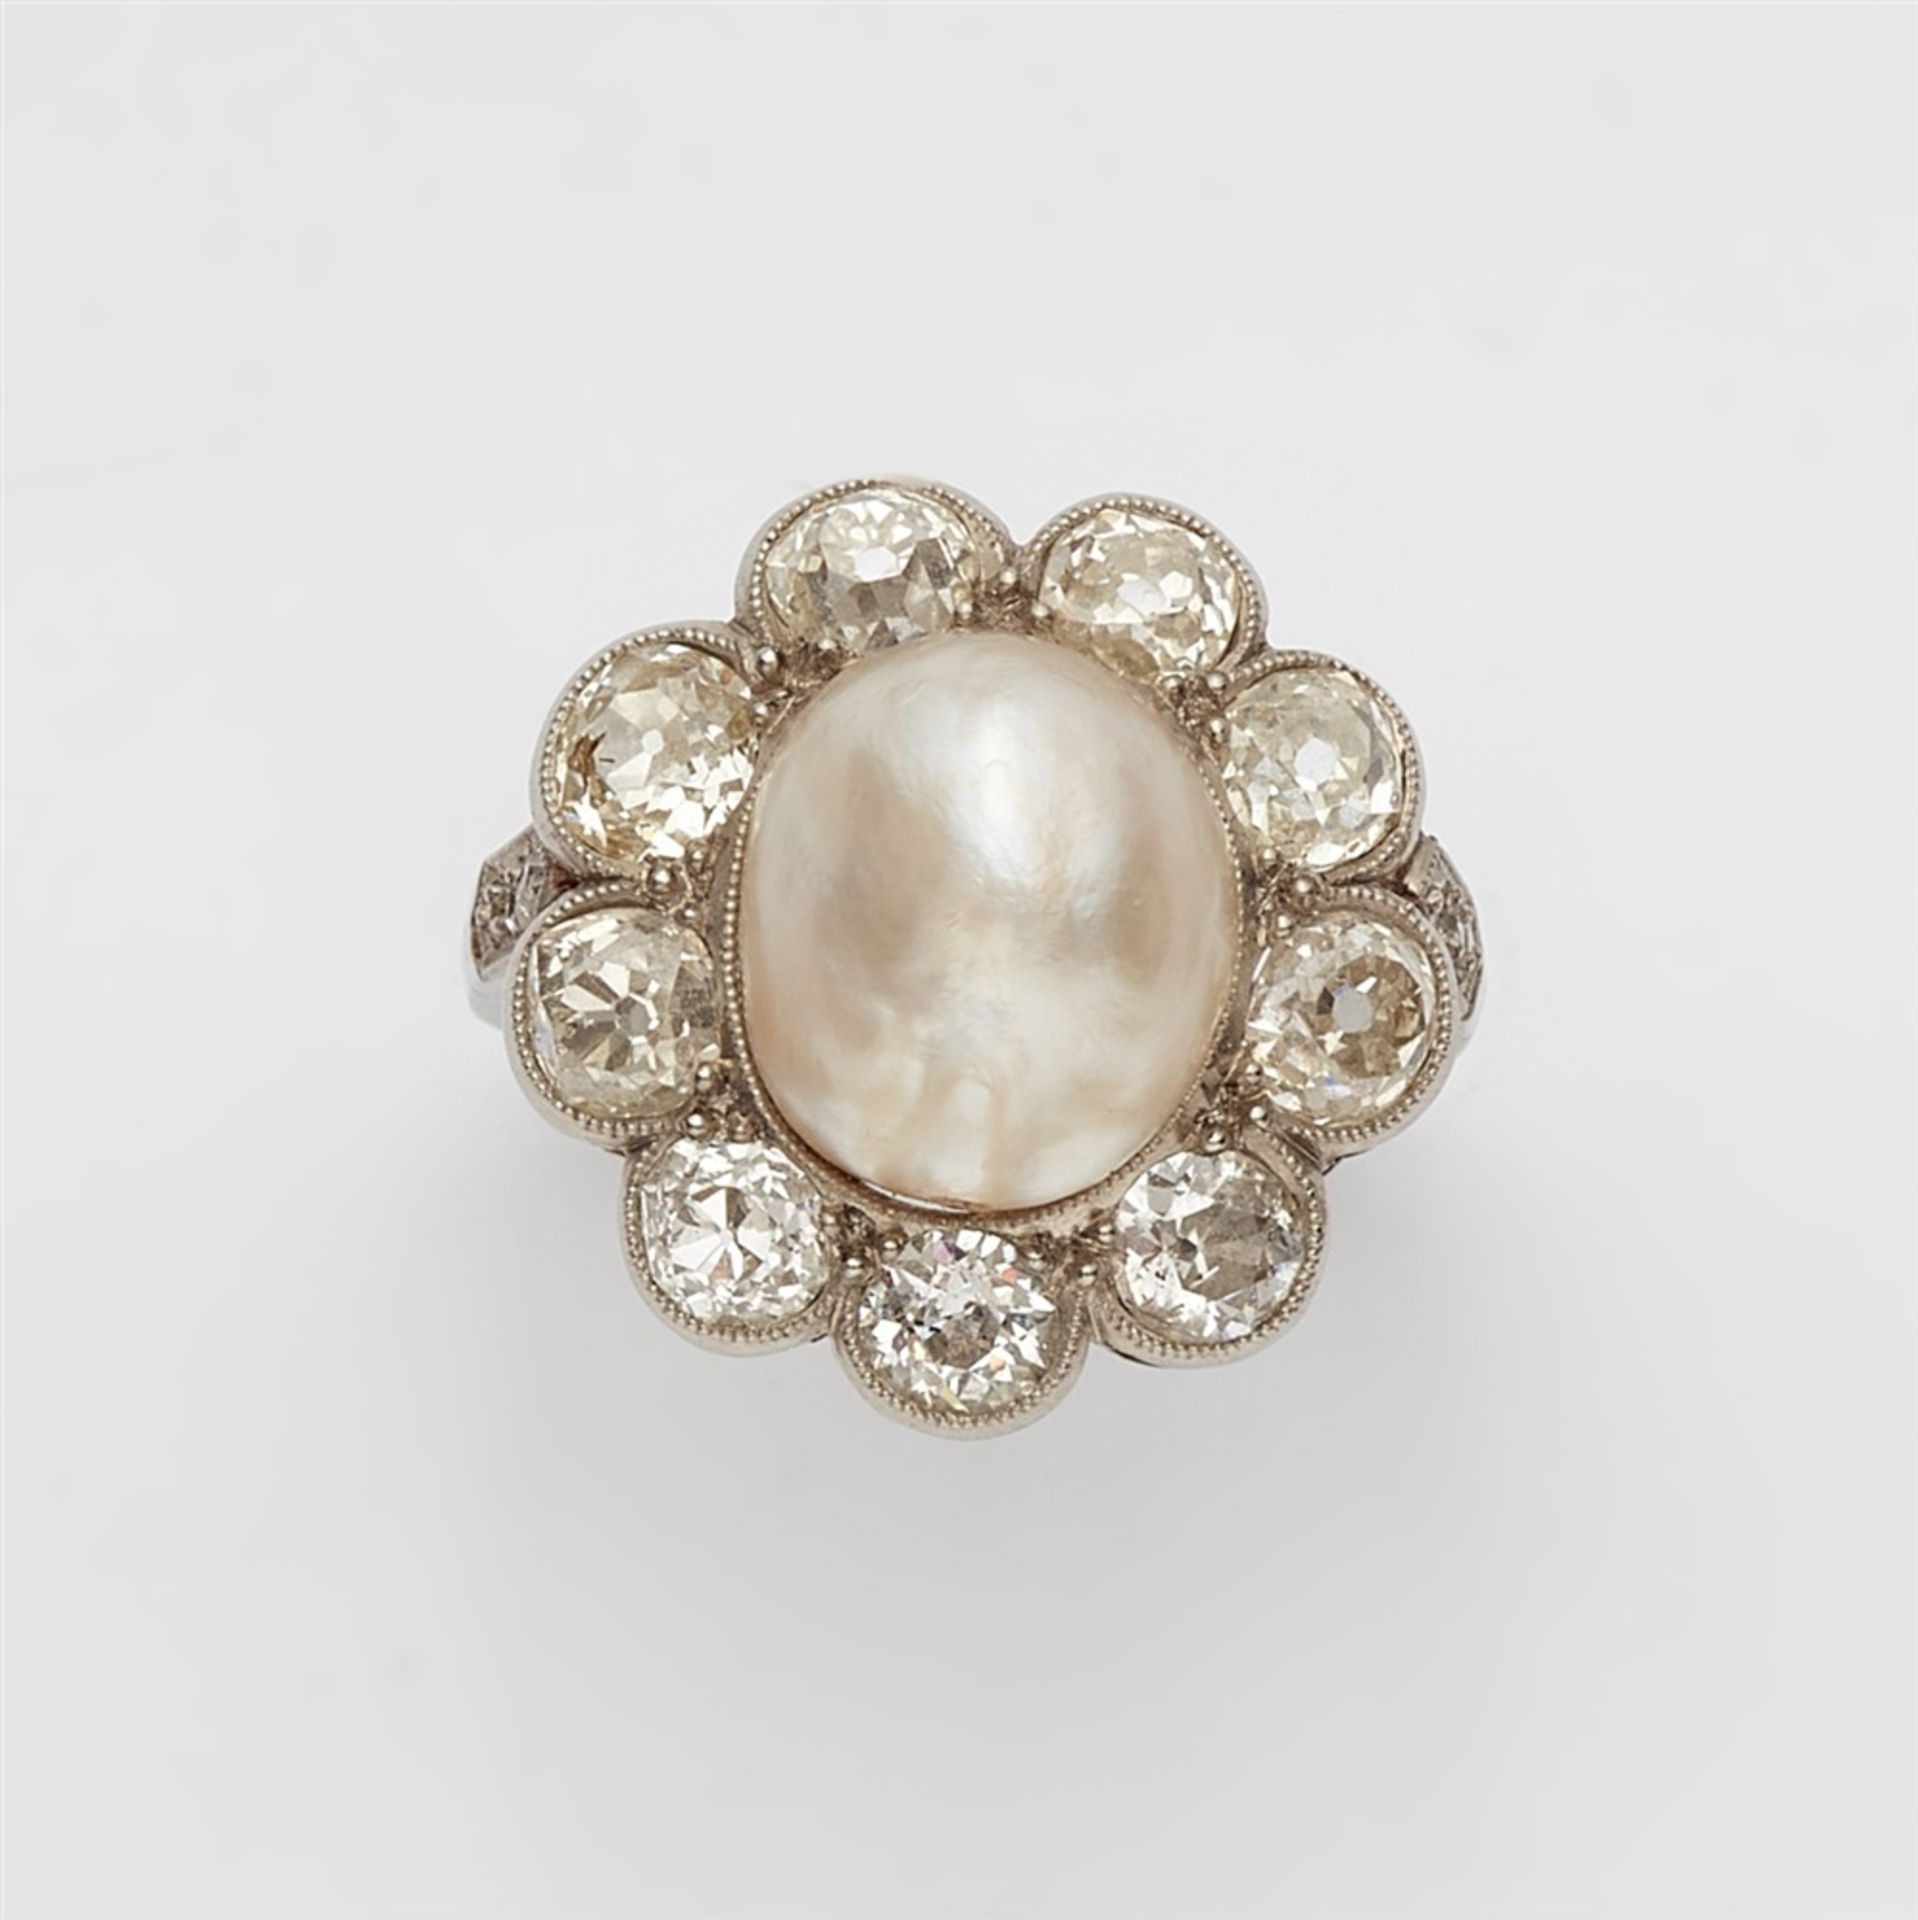 A Belle Epoque diamond and pearl ringA platinum ring with diamond set shoulders and a flower-